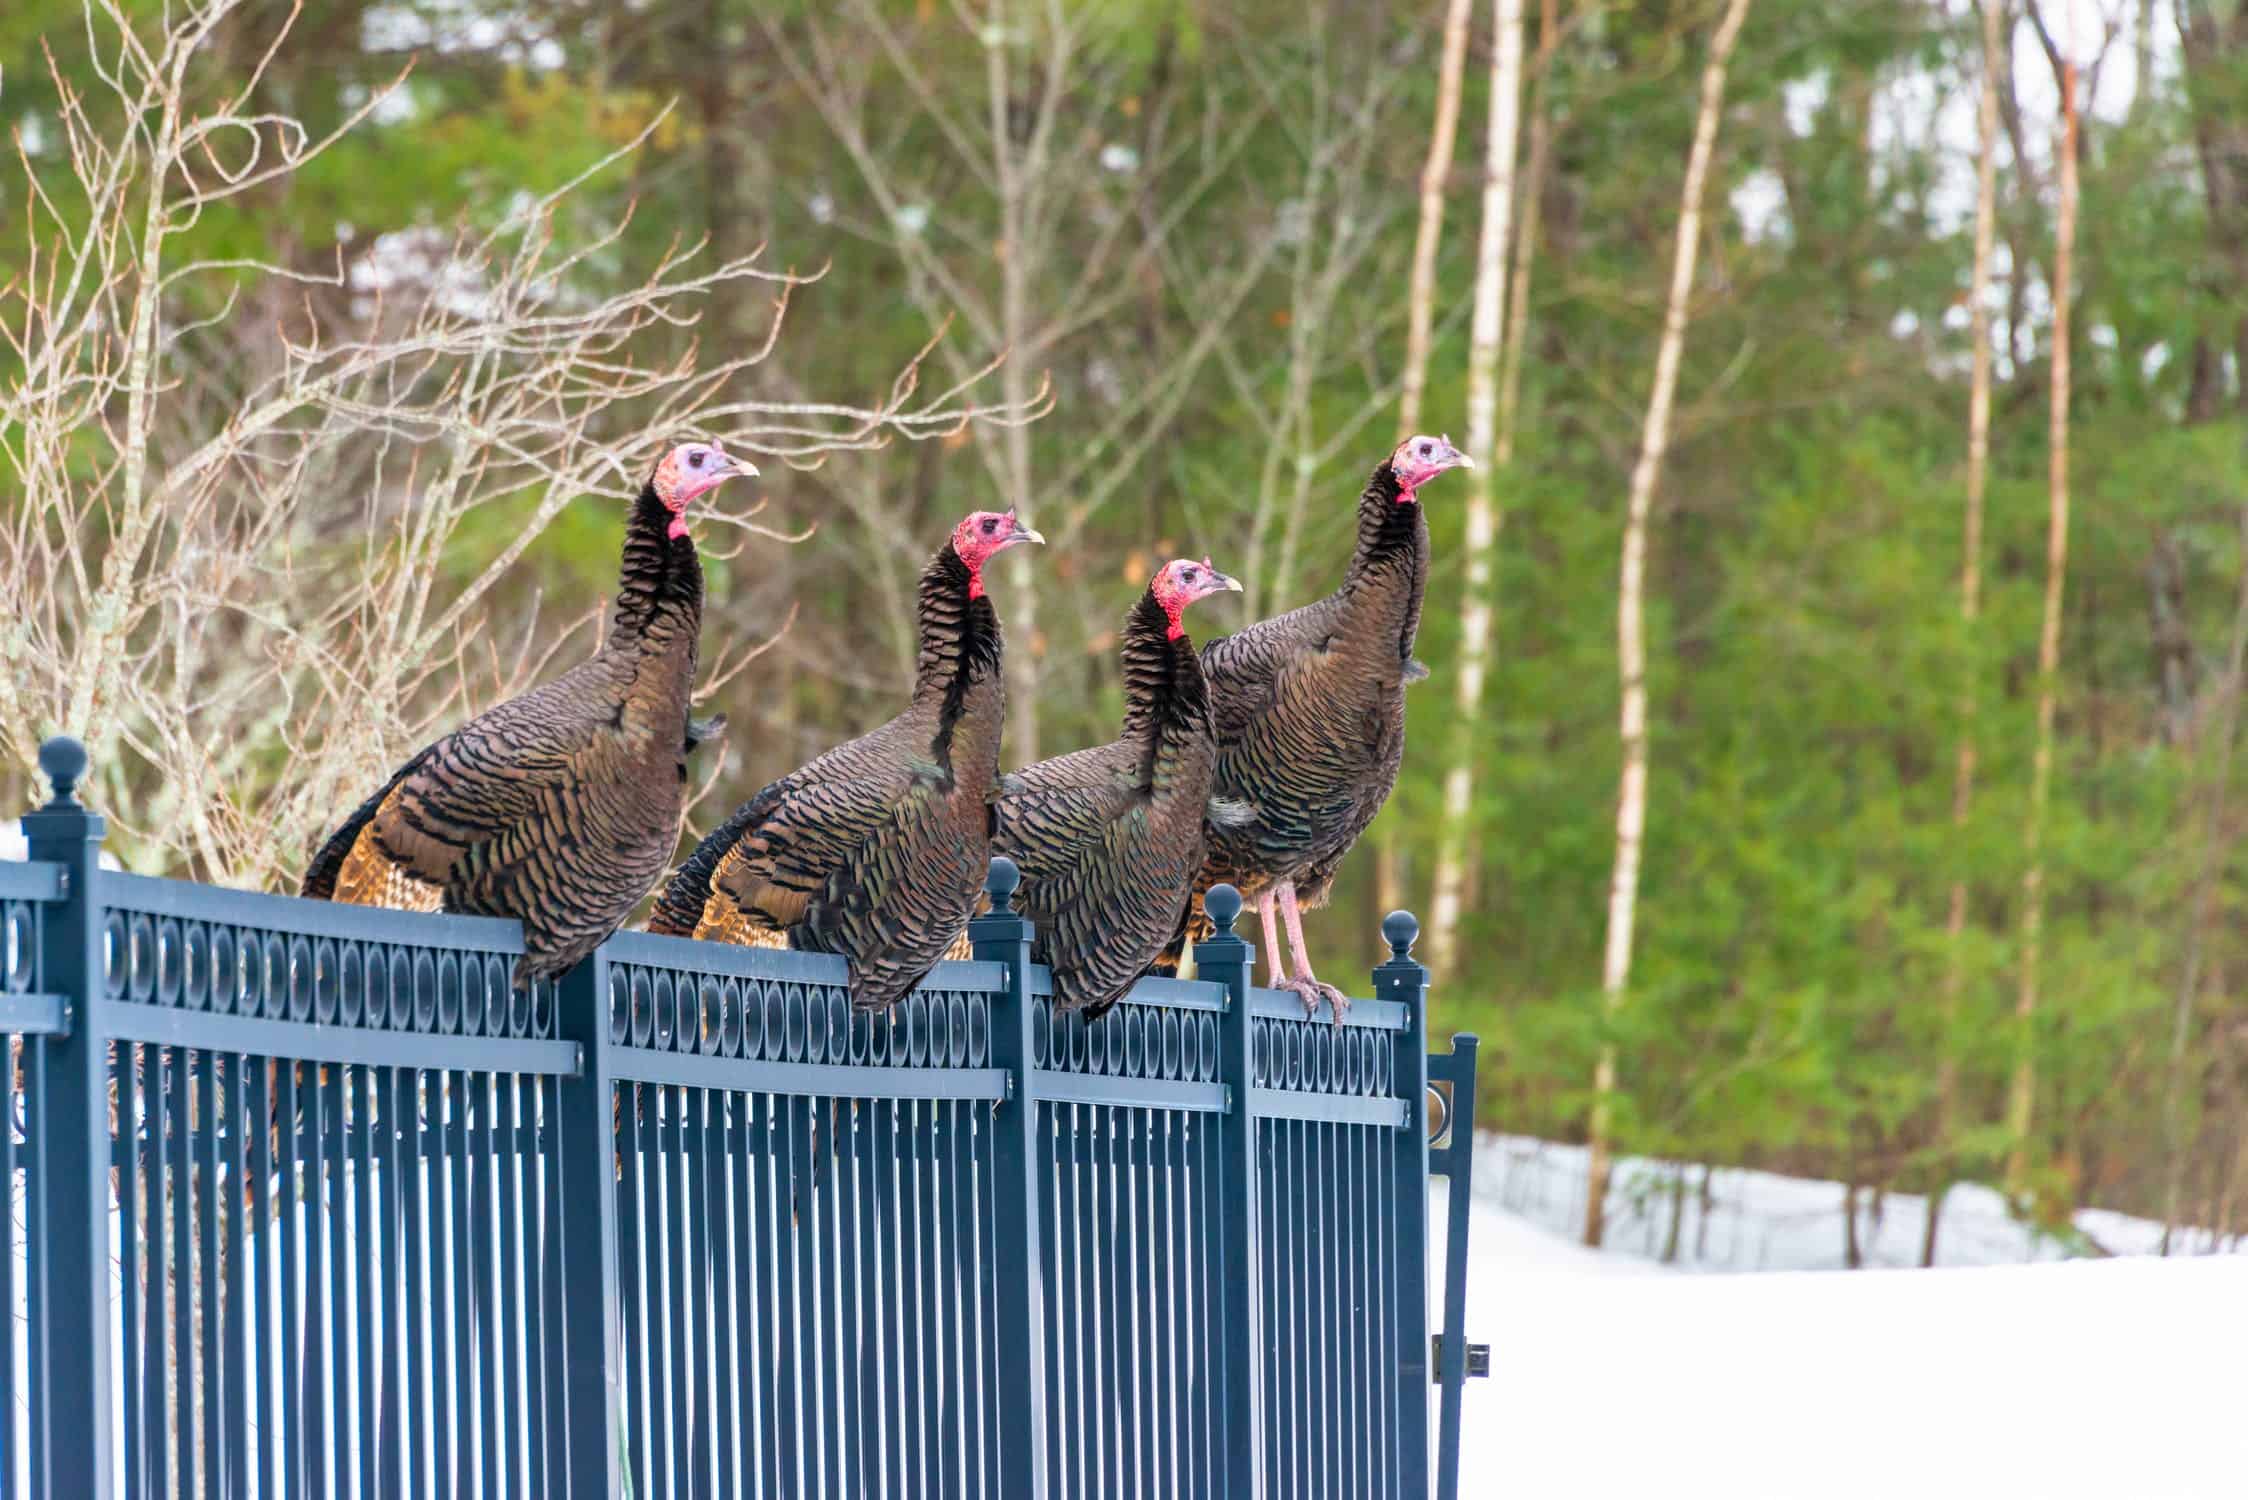 Turkeys voting for Christmas is becoming ‘increasingly real’